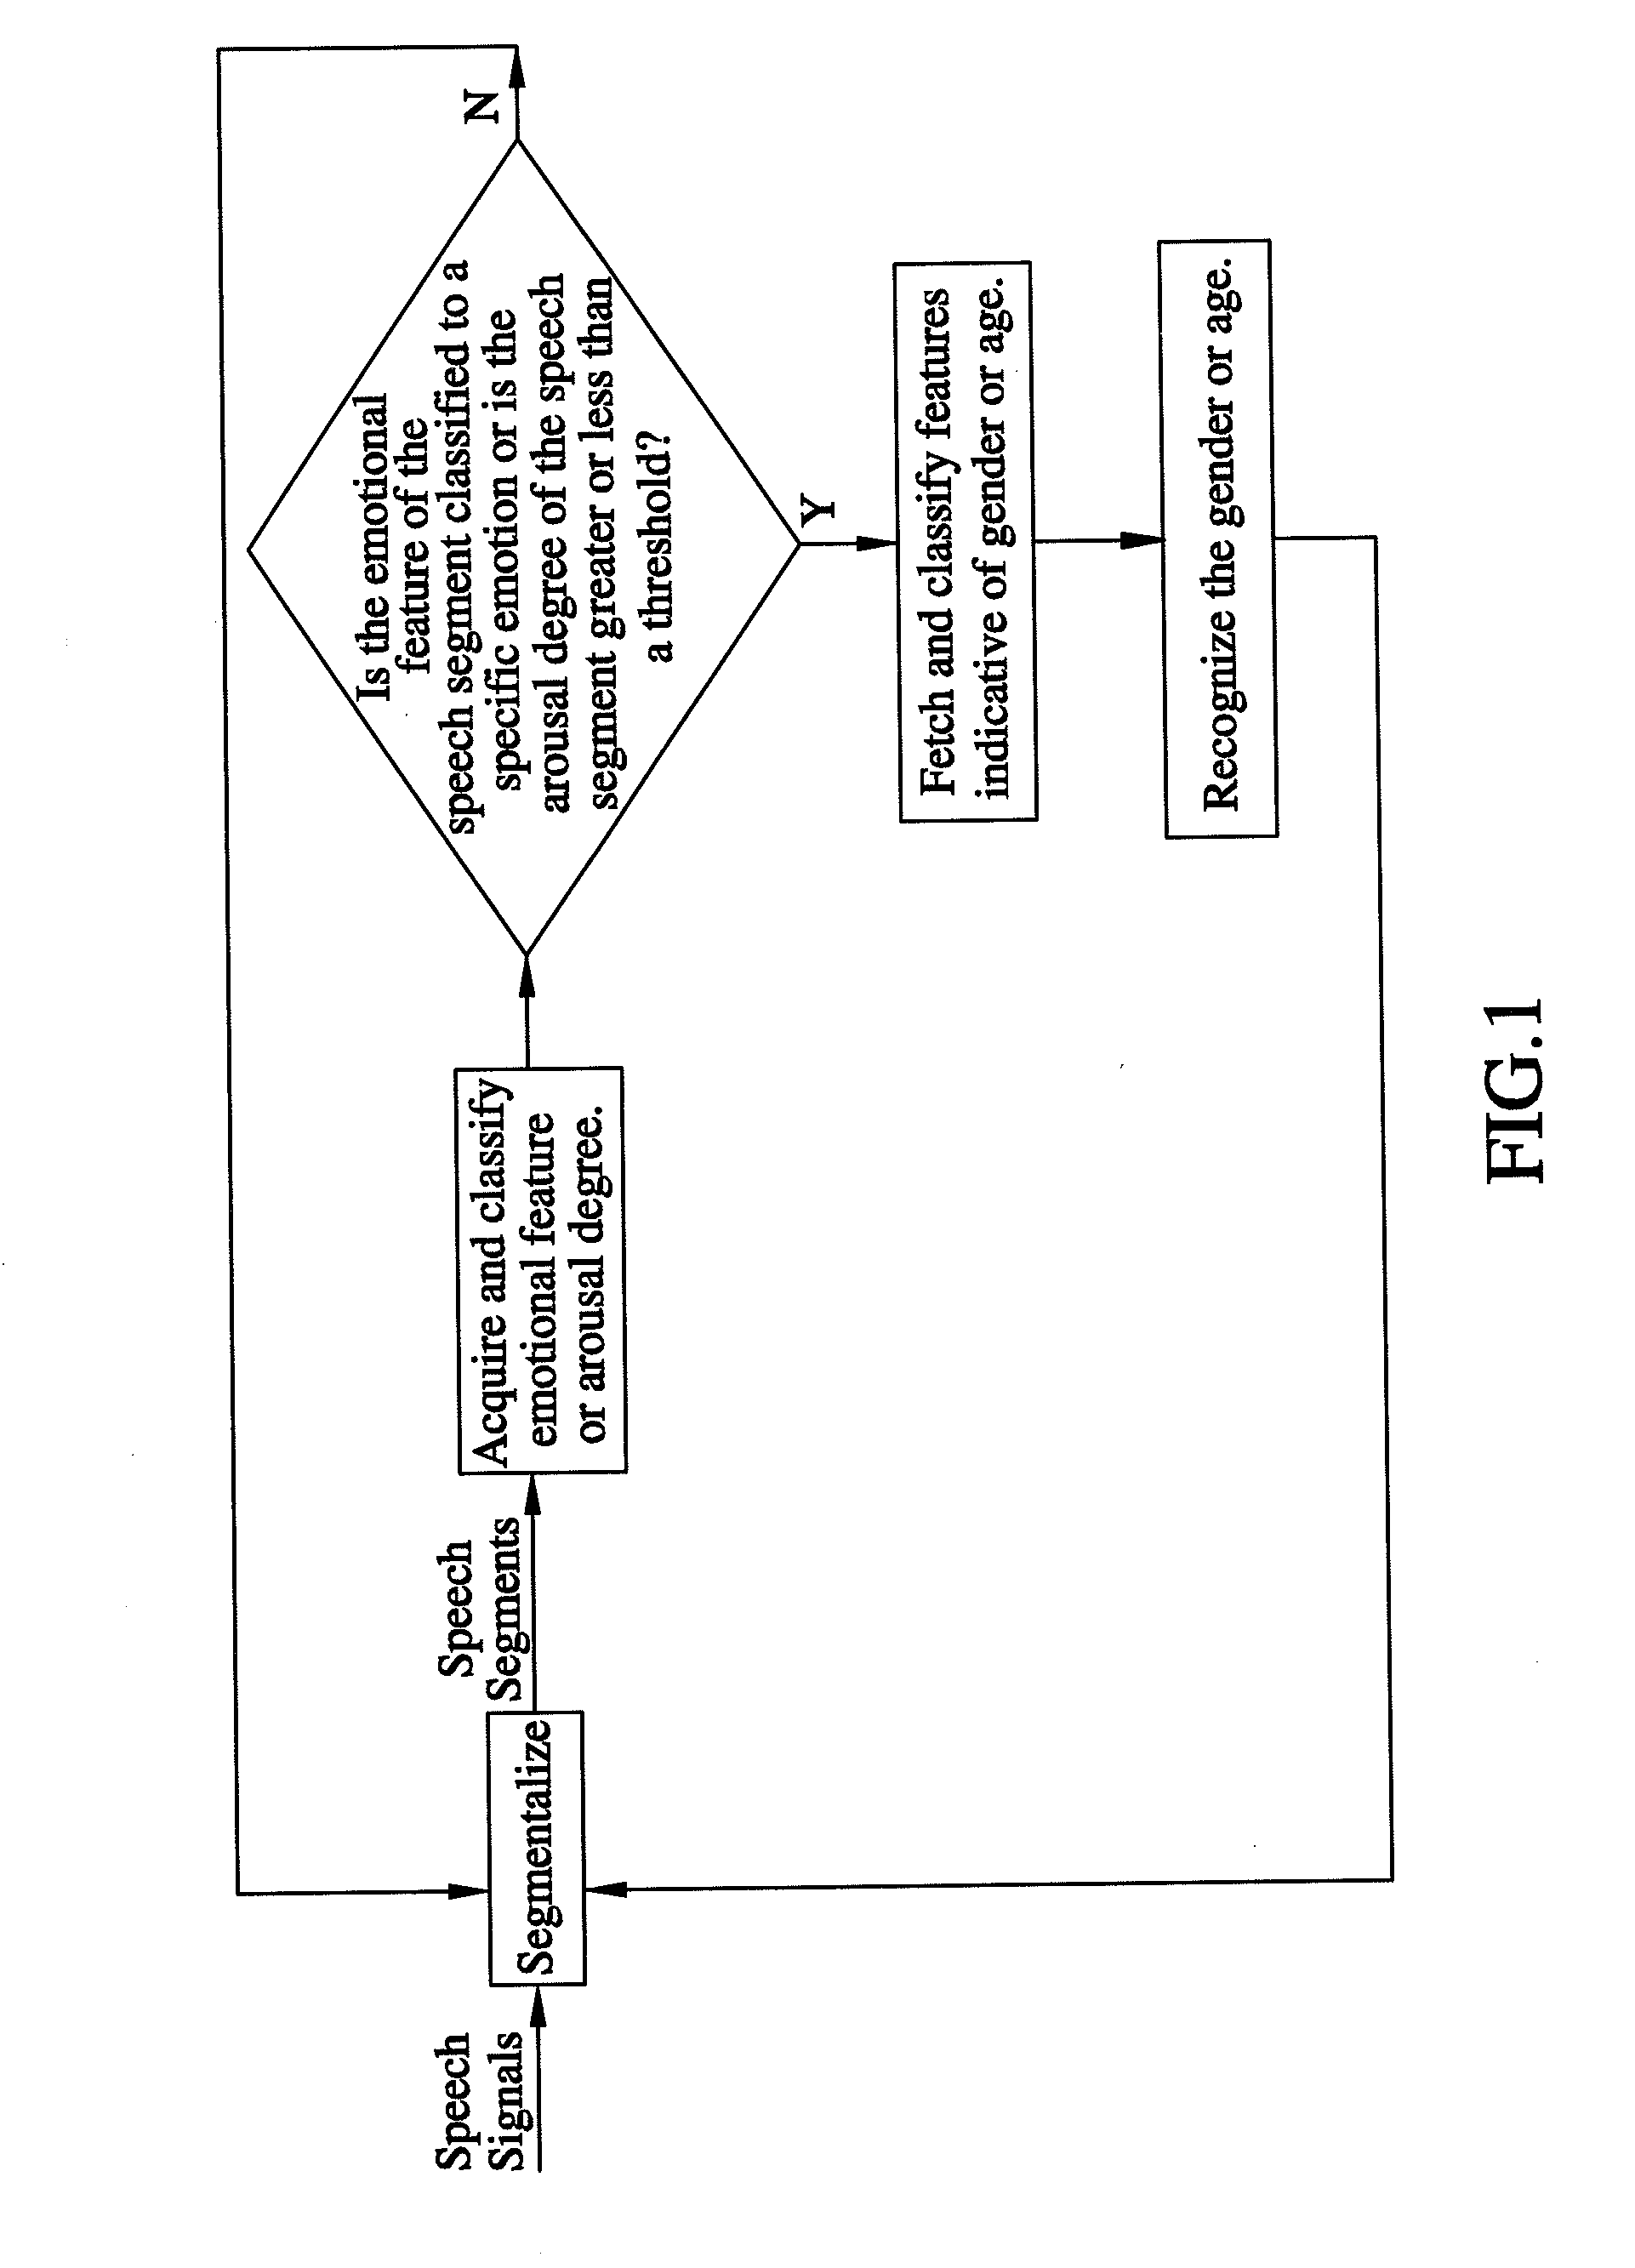 Method of recognizing gender or age of a speaker according to speech emotion or arousal